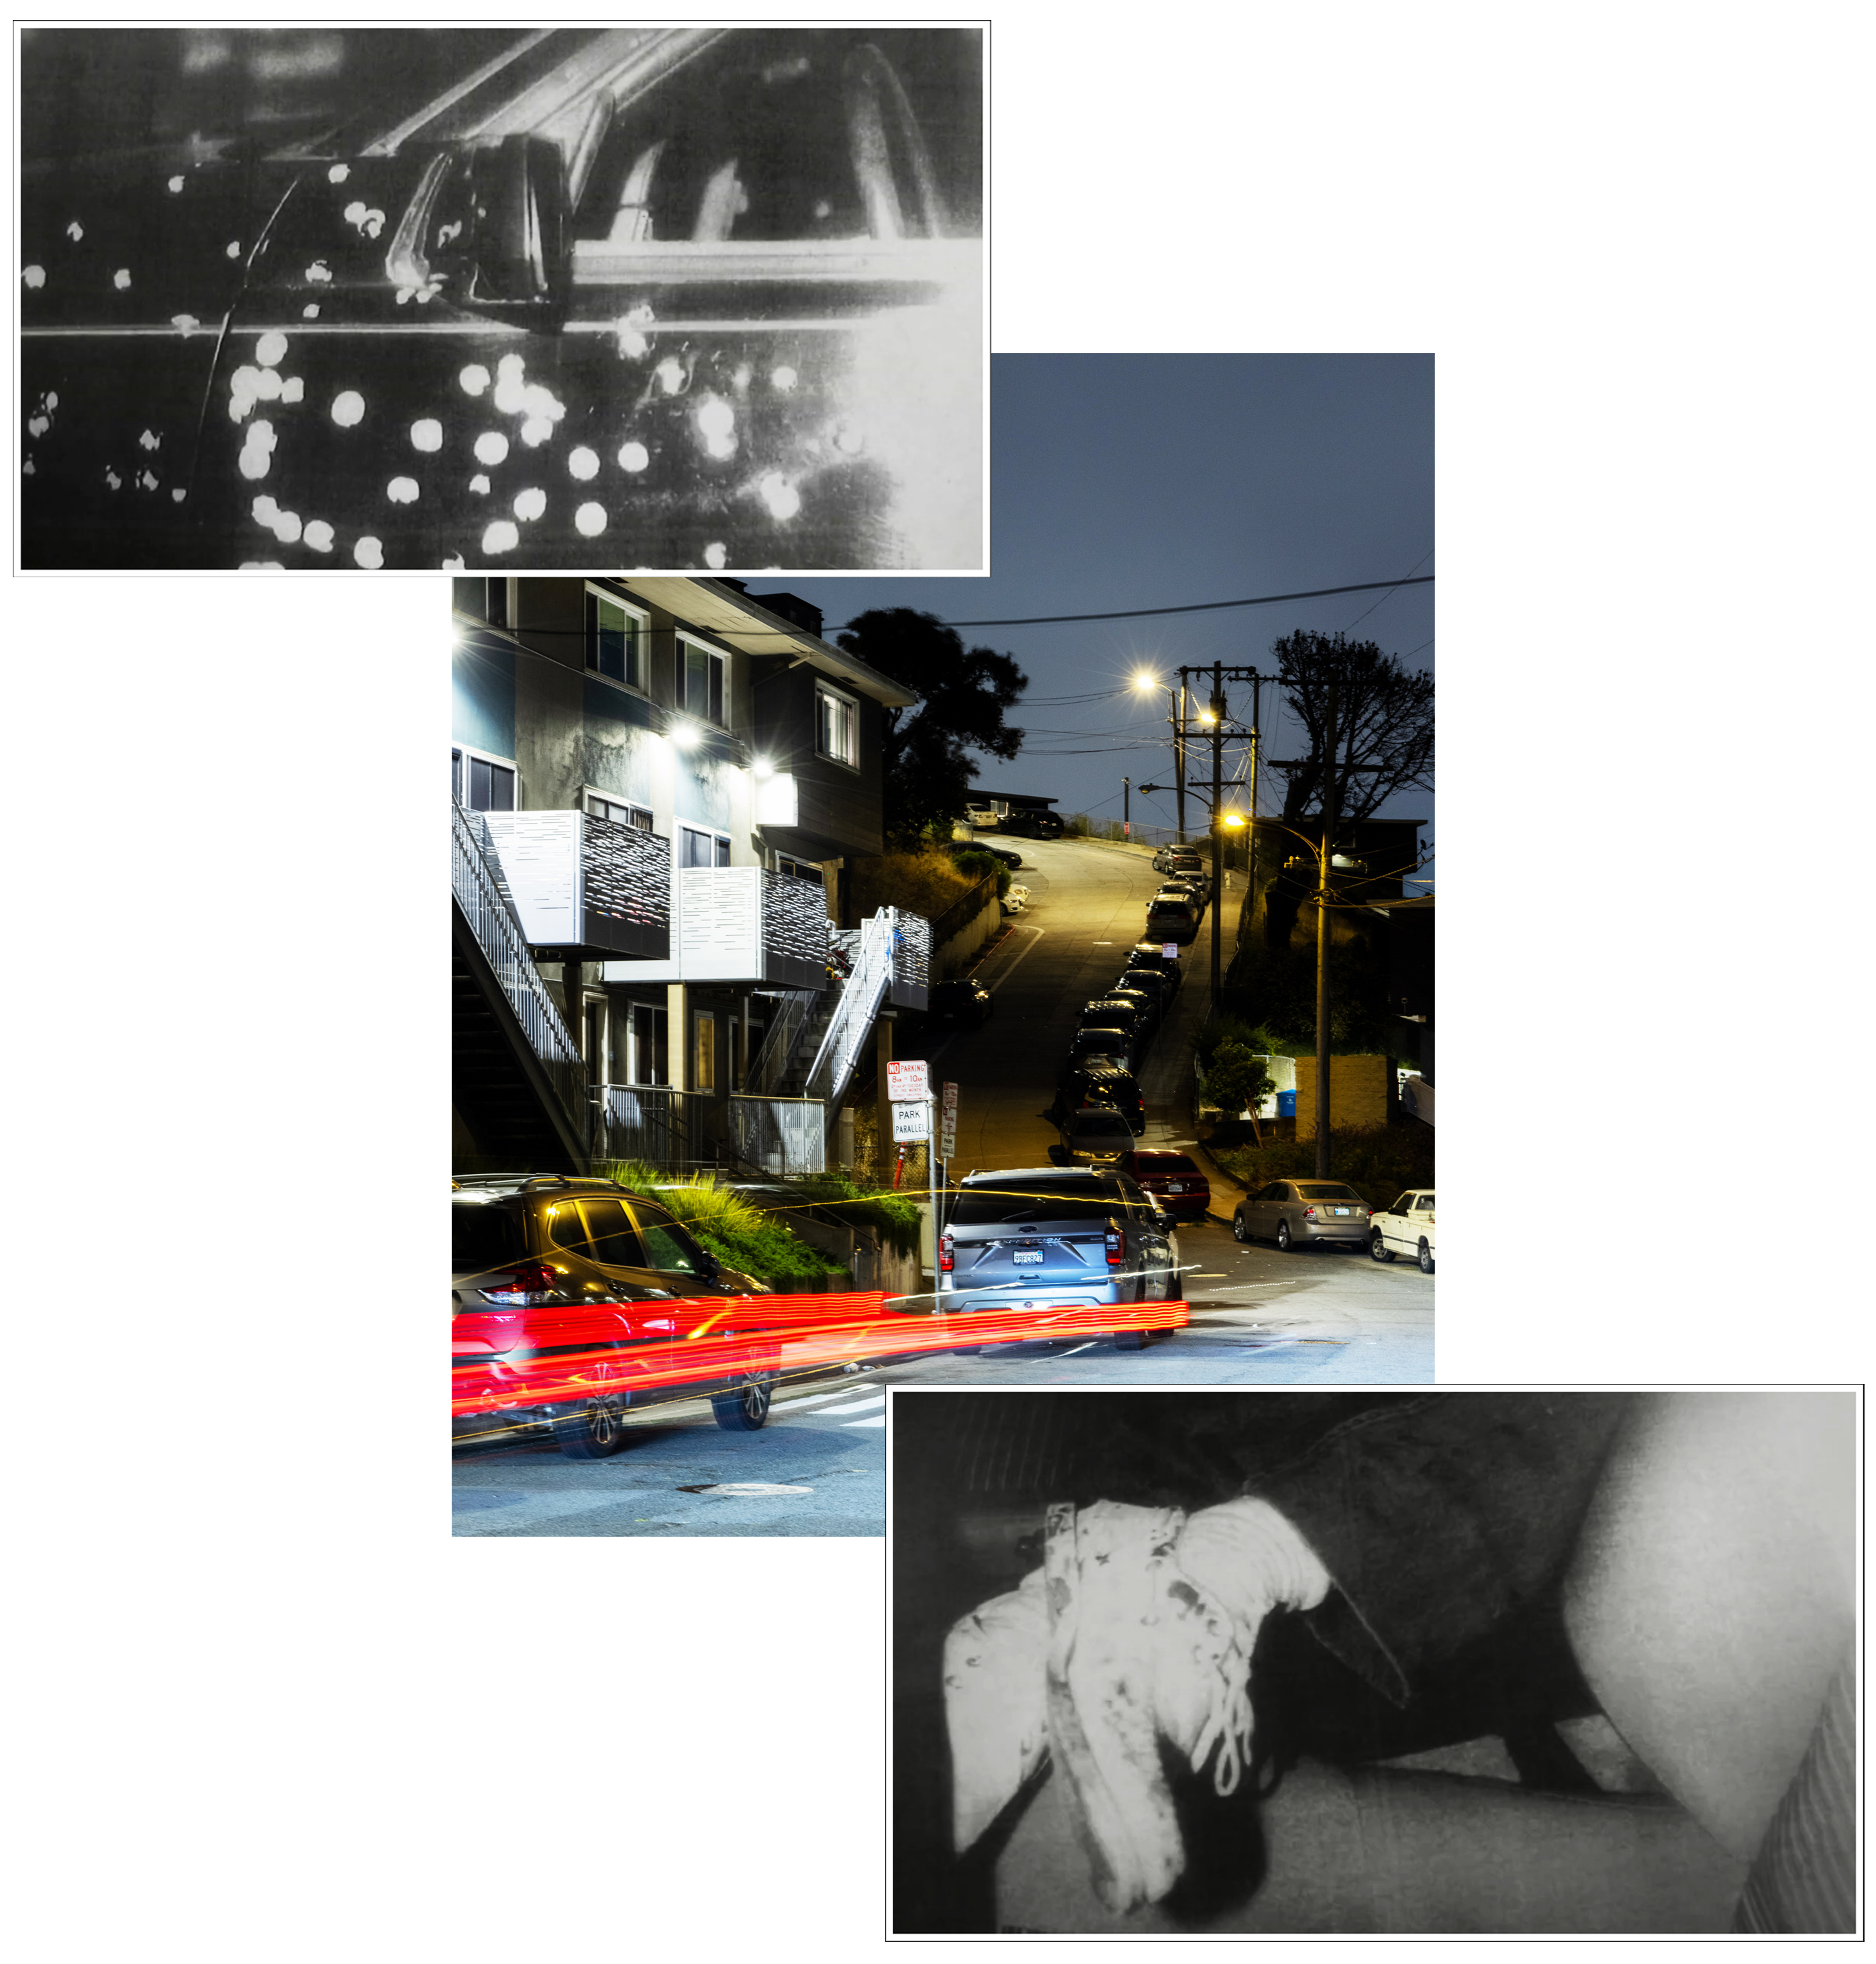 This image collage includes three photos: a car door reflecting streetlights, a nighttime urban scene with cars parked along a hilly street, and a close-up of feet in sneakers.